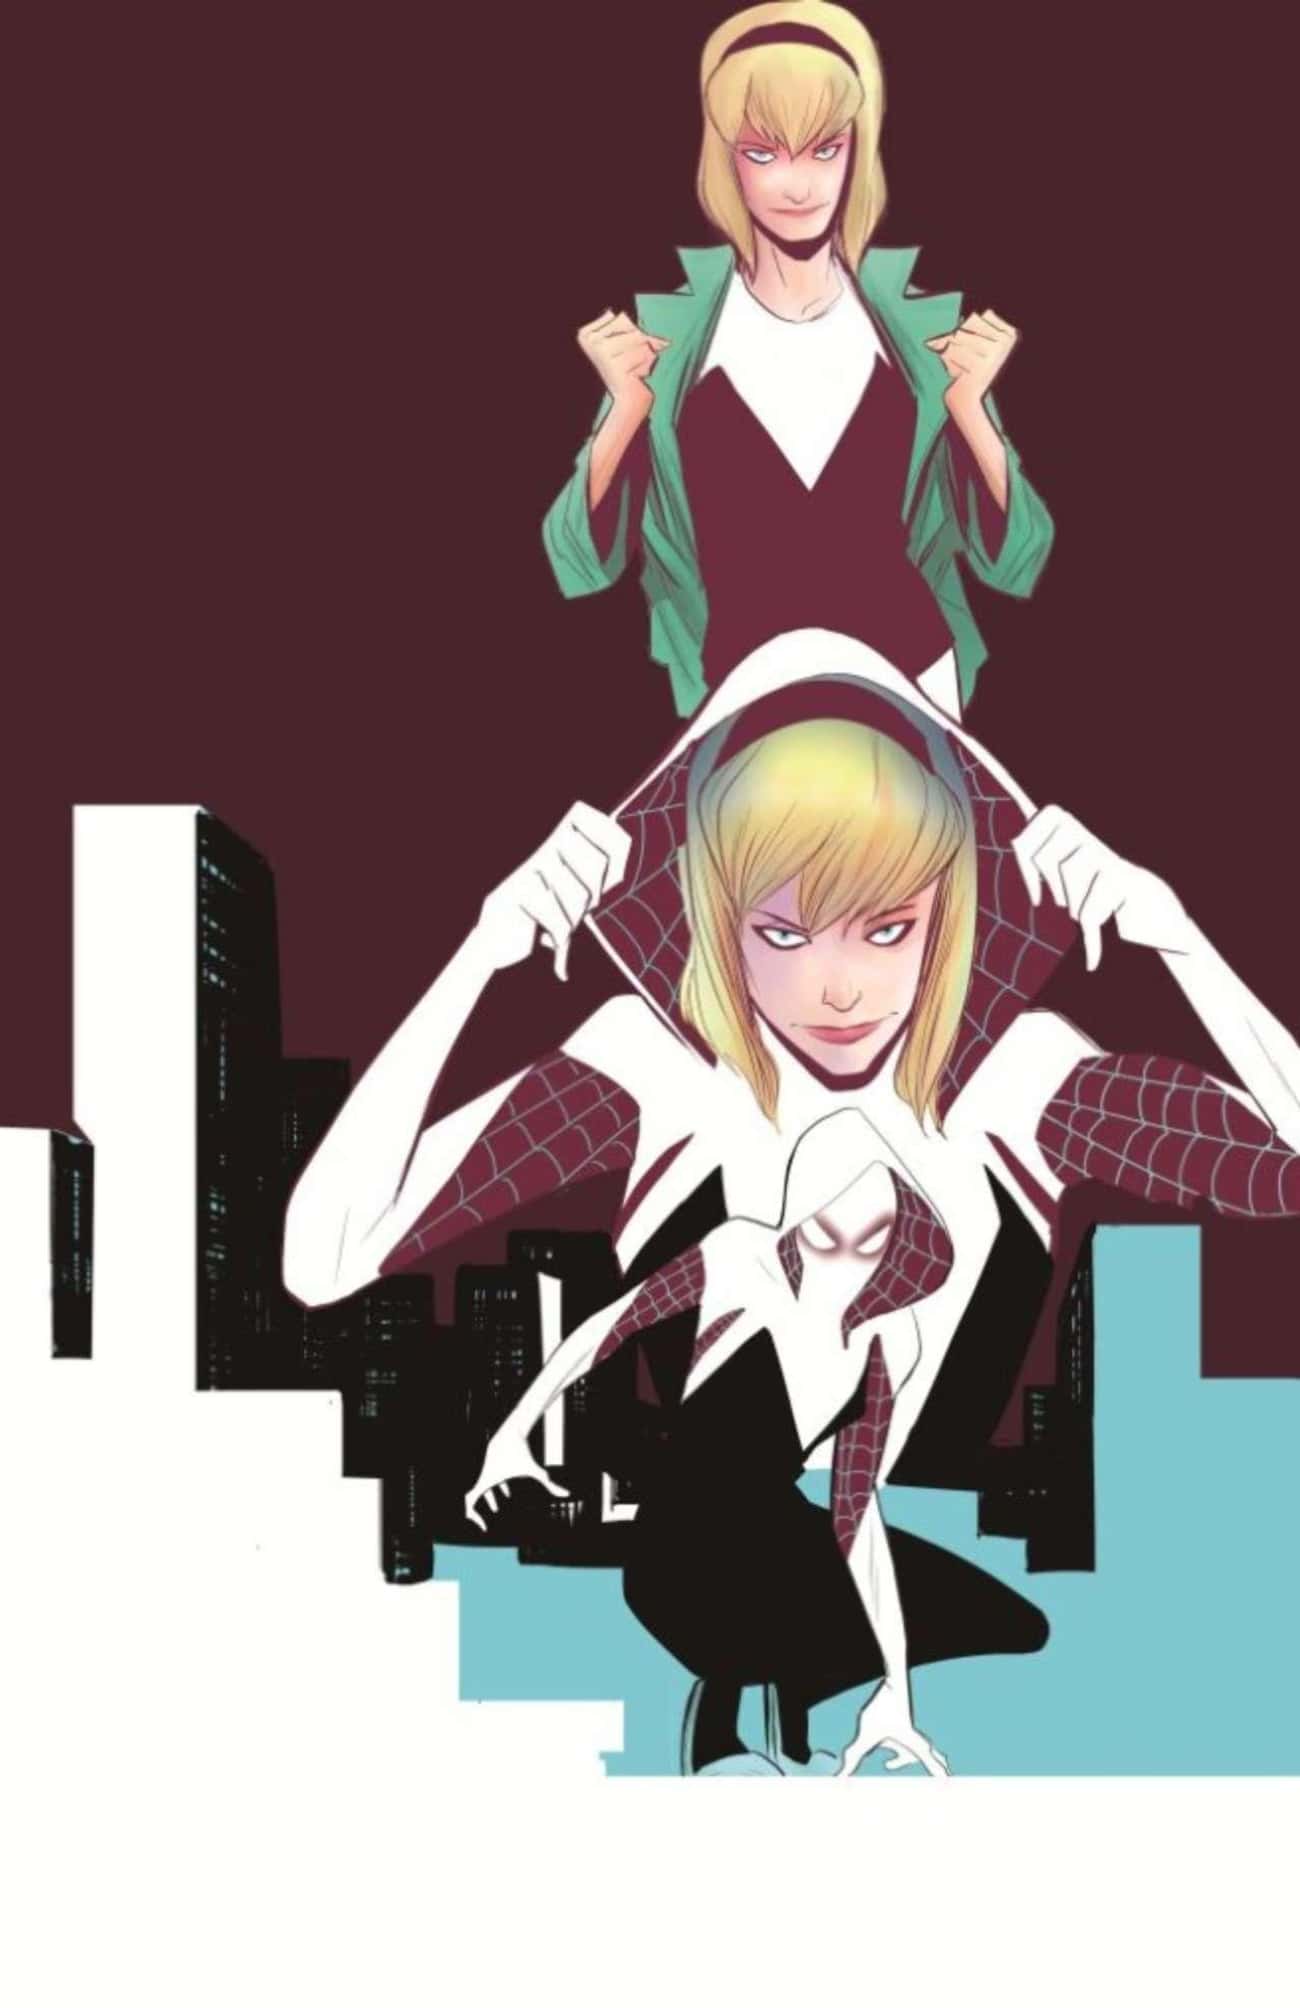 Spider-Gwen Has Many Codenames - But Only One Awesome
Identity